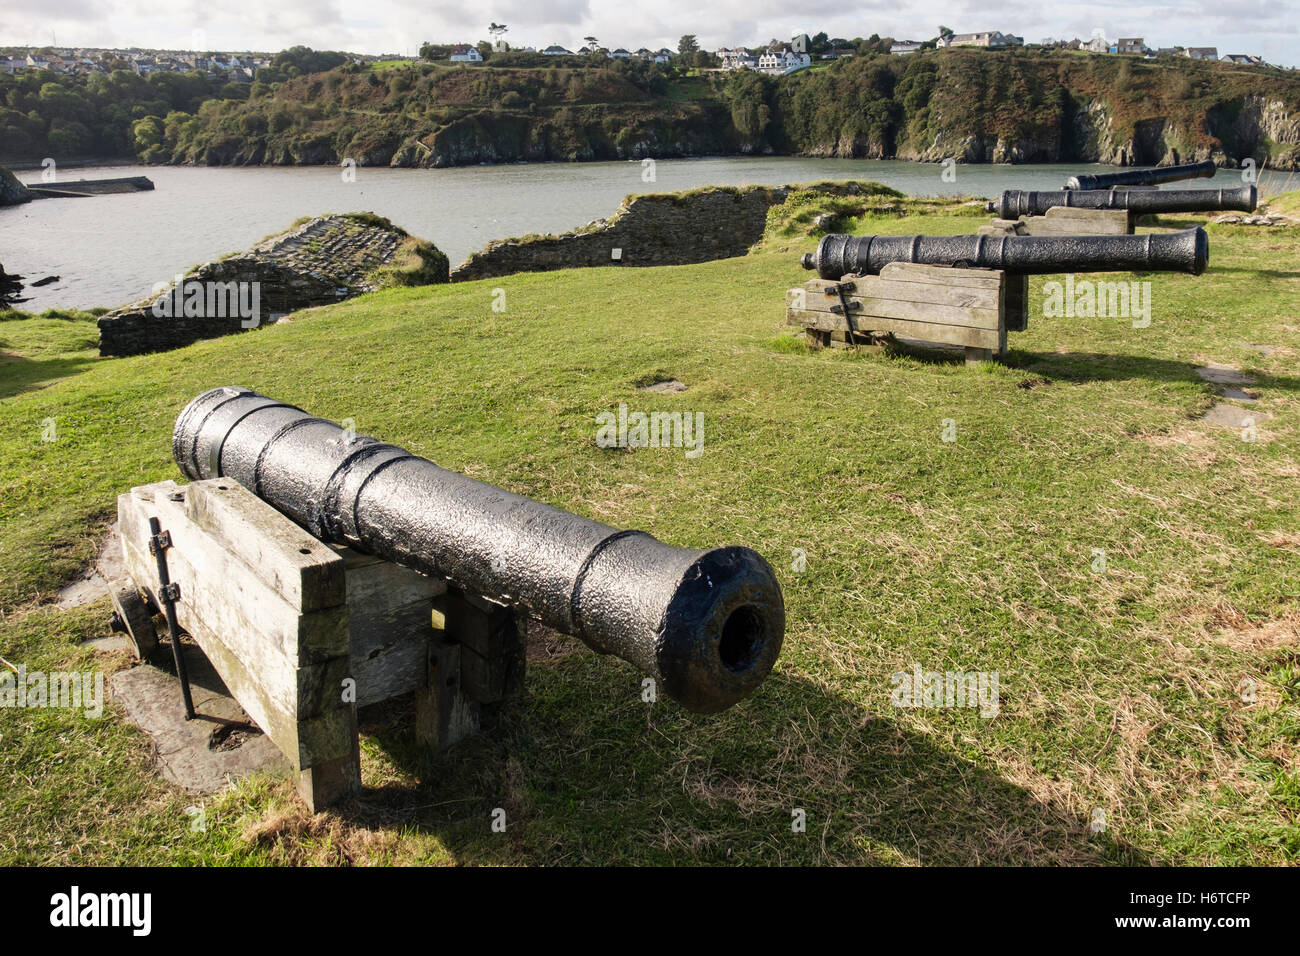 Old 9 pounder guns in 18th century fort ruins 1781 on a headland overlooking port. Fishguard, Pembrokeshire, Wales, UK Stock Photo